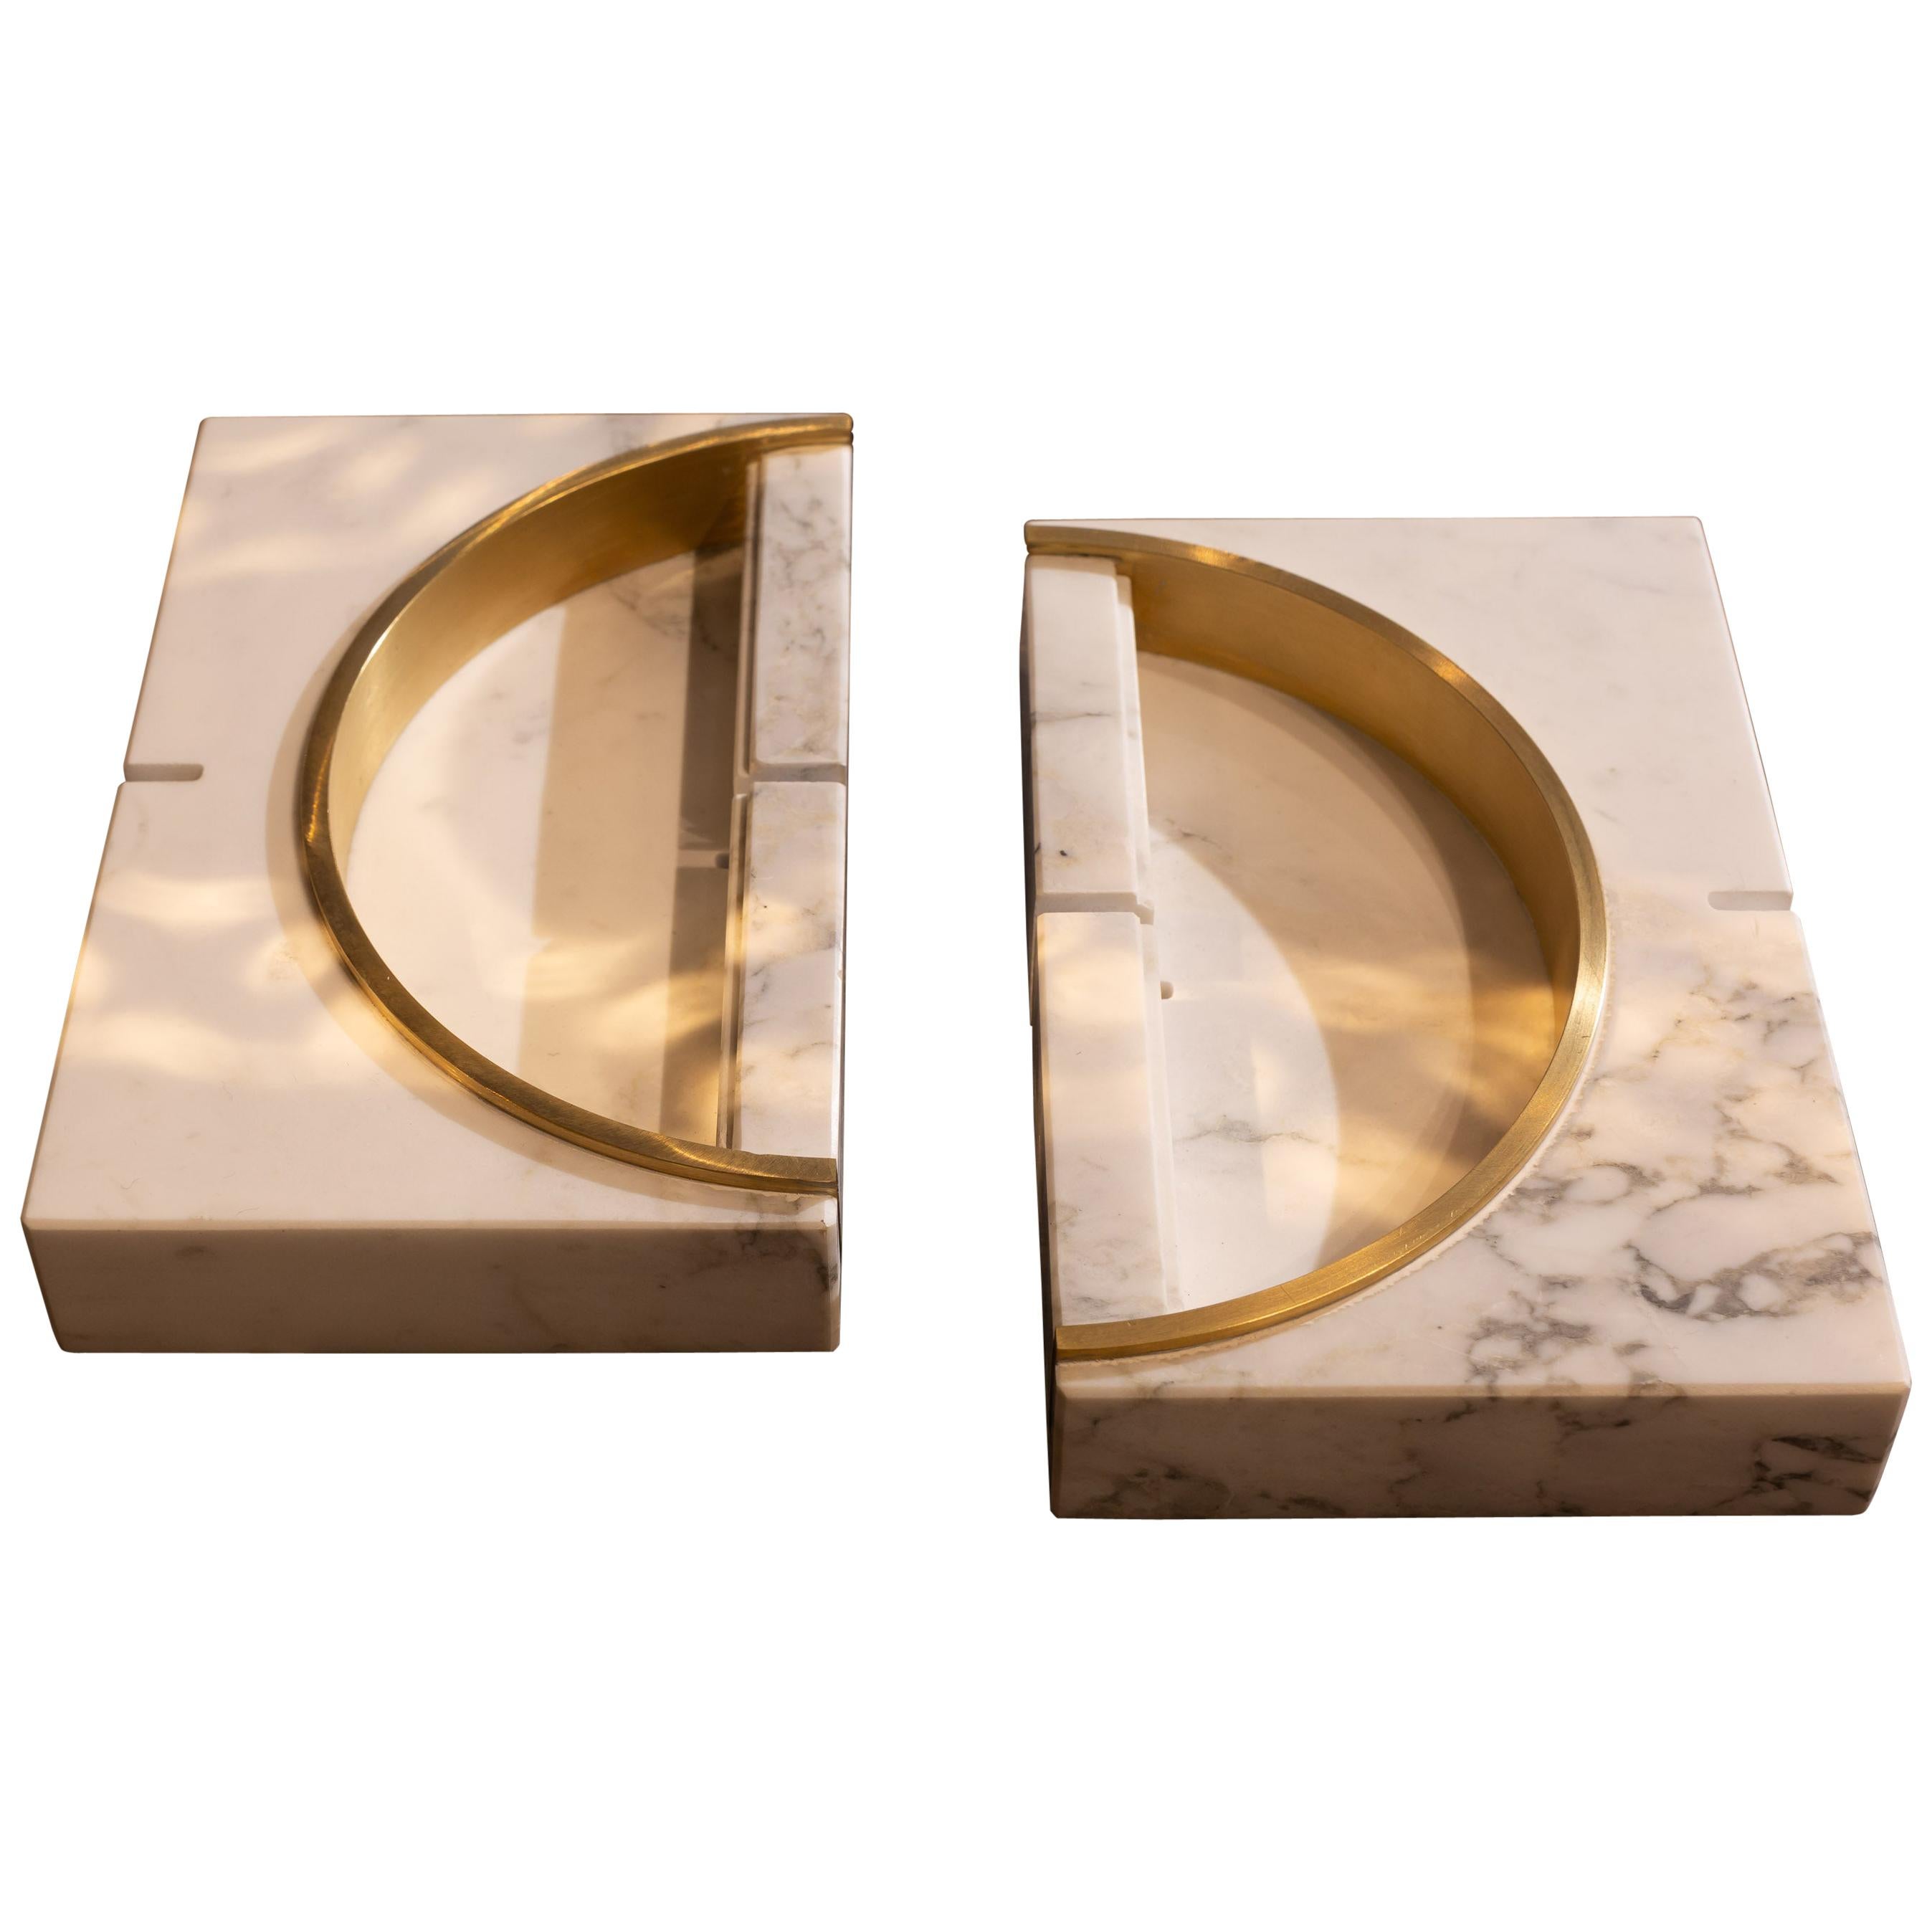 Marble Ashtrays / Vase with detail in Brass designed by Andrea Bonini For Sale